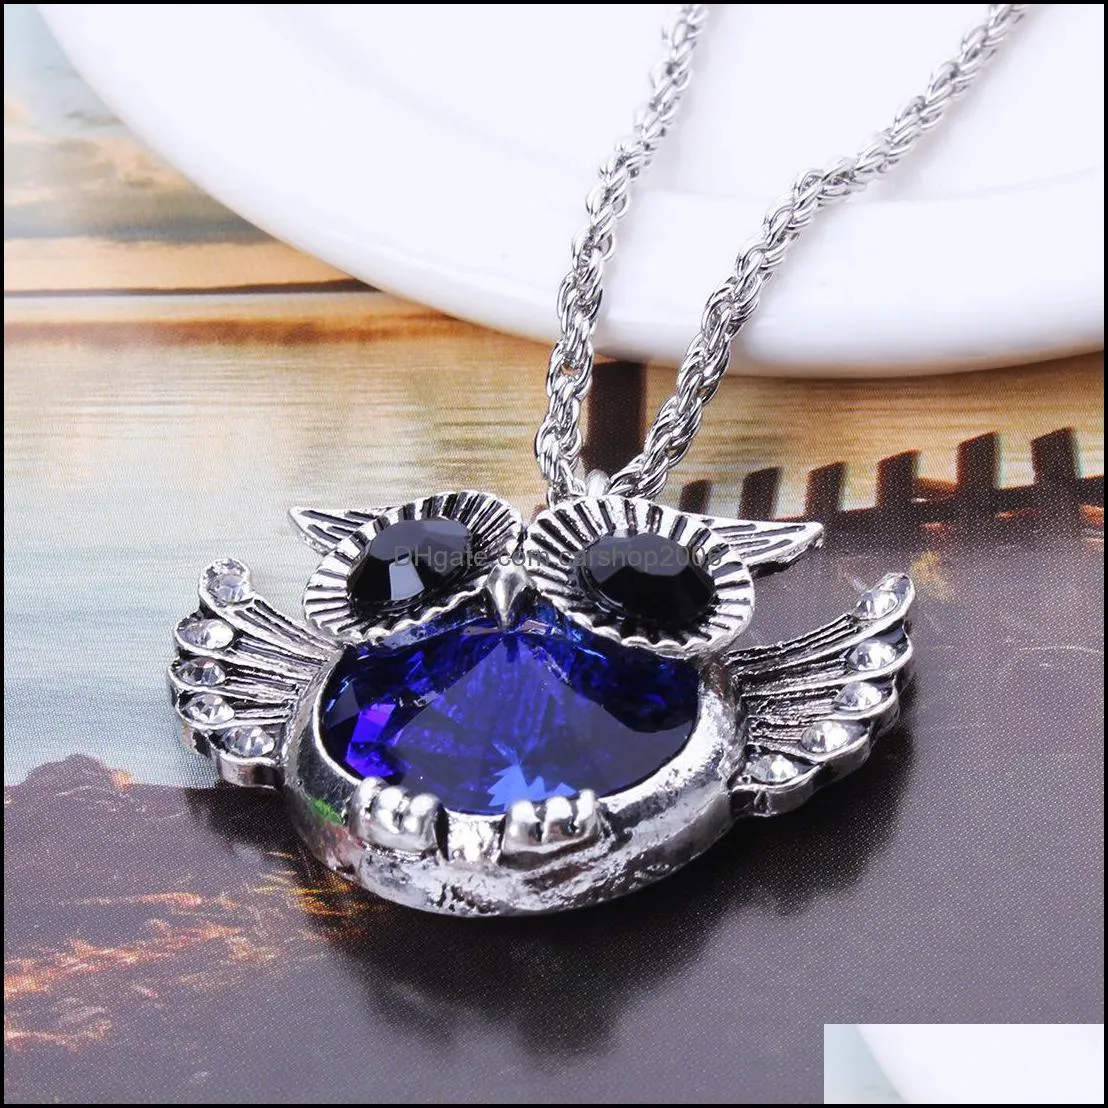 necklaces pendant chain necklace flying owl blue beautifully crystal rhinestone bead fashion pendant necklace carshop2006